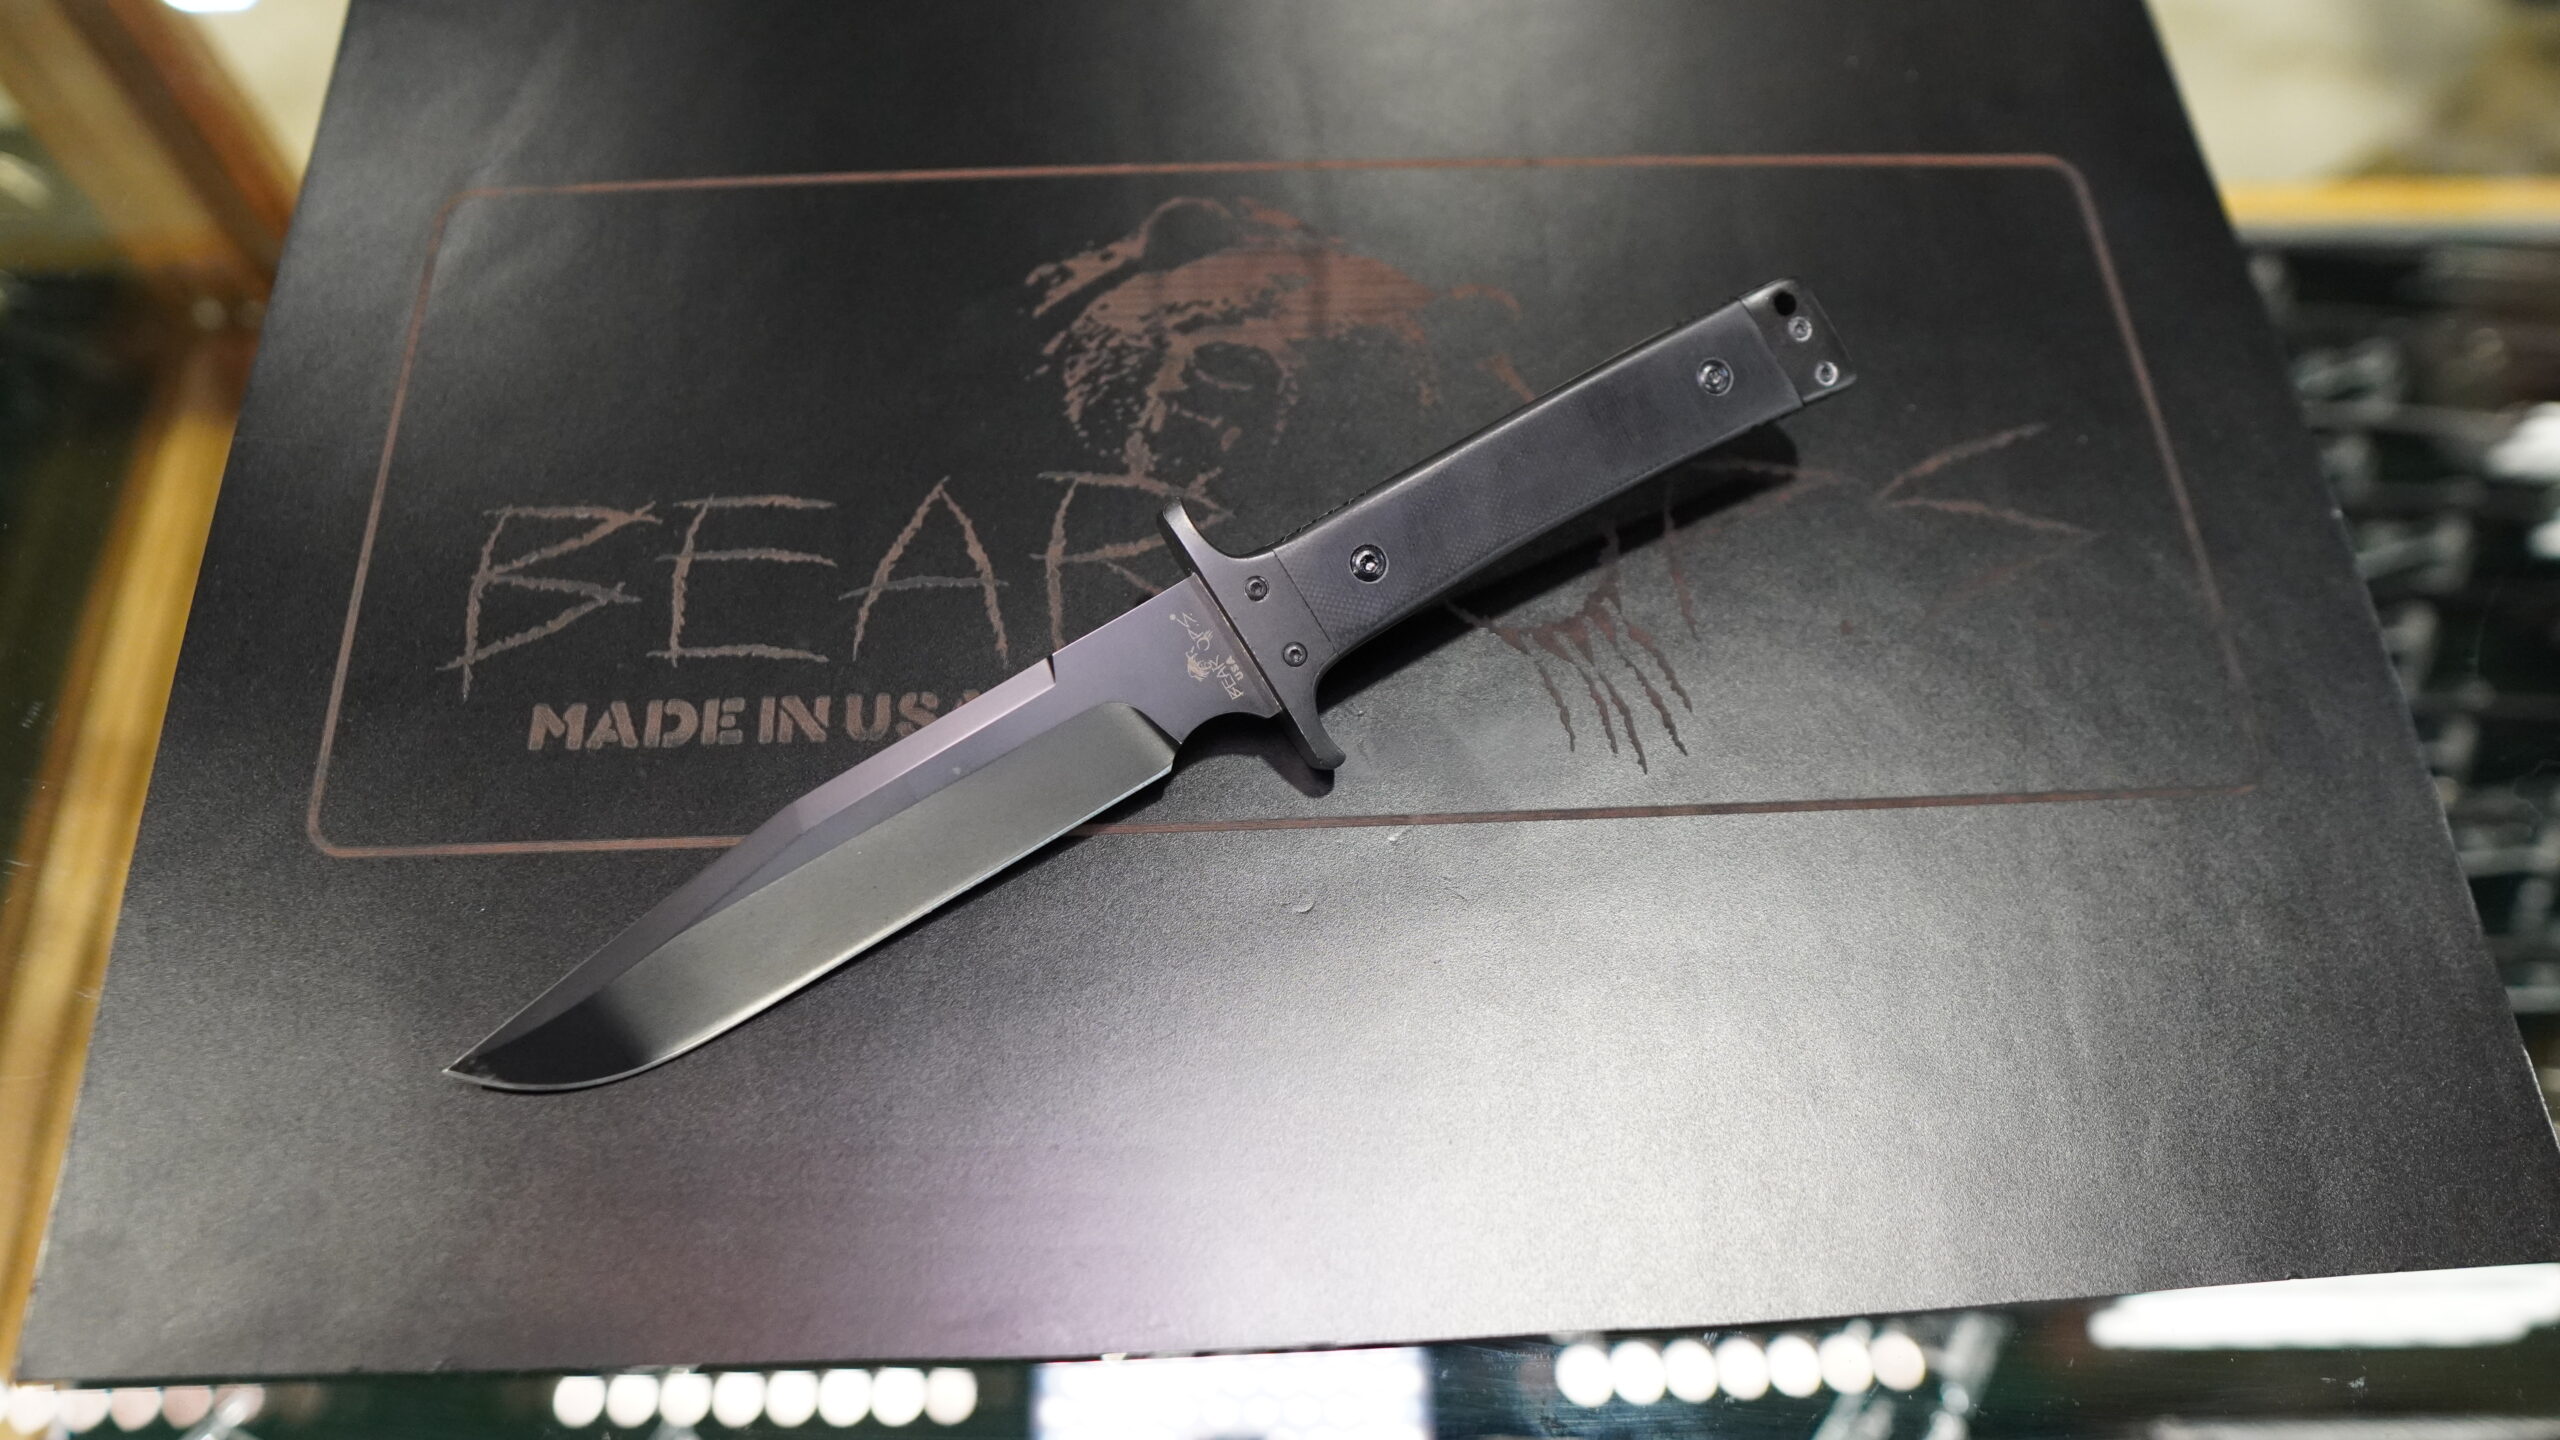 Announcement: The 'Sharpest Knife' Competition at KnivesUK 2018 - TACTICAL  REVIEWS